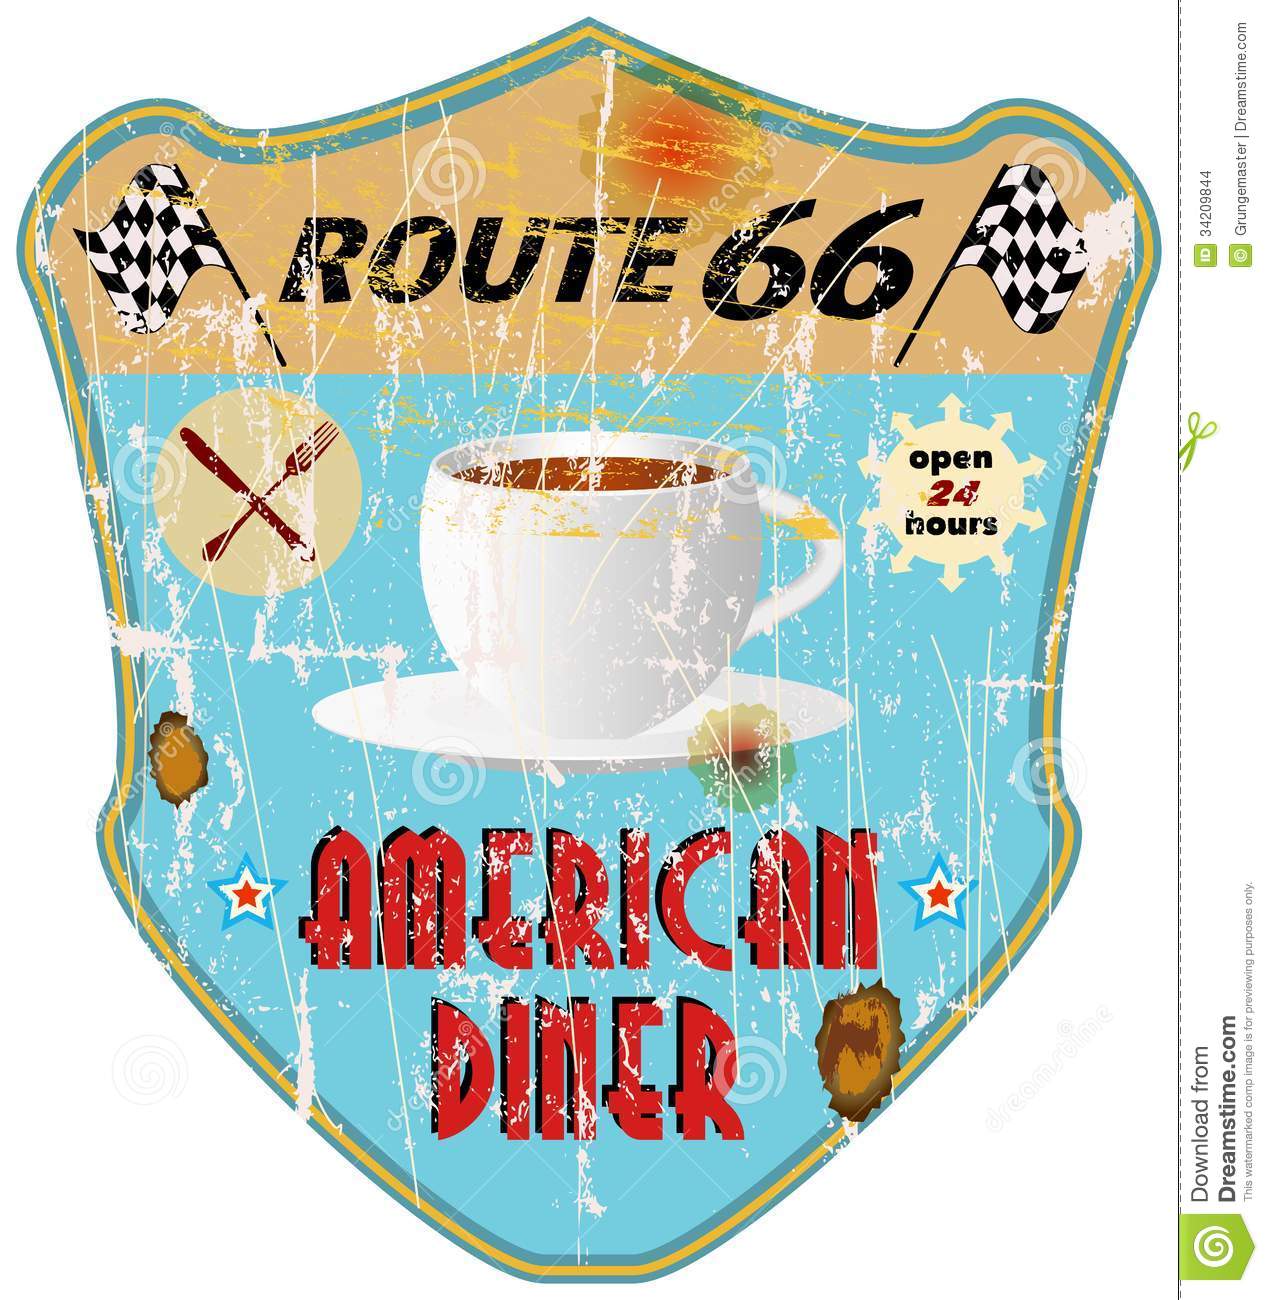 Route 66 Vintage Diner Sign Nostalgic Grungy Style Vector Eps